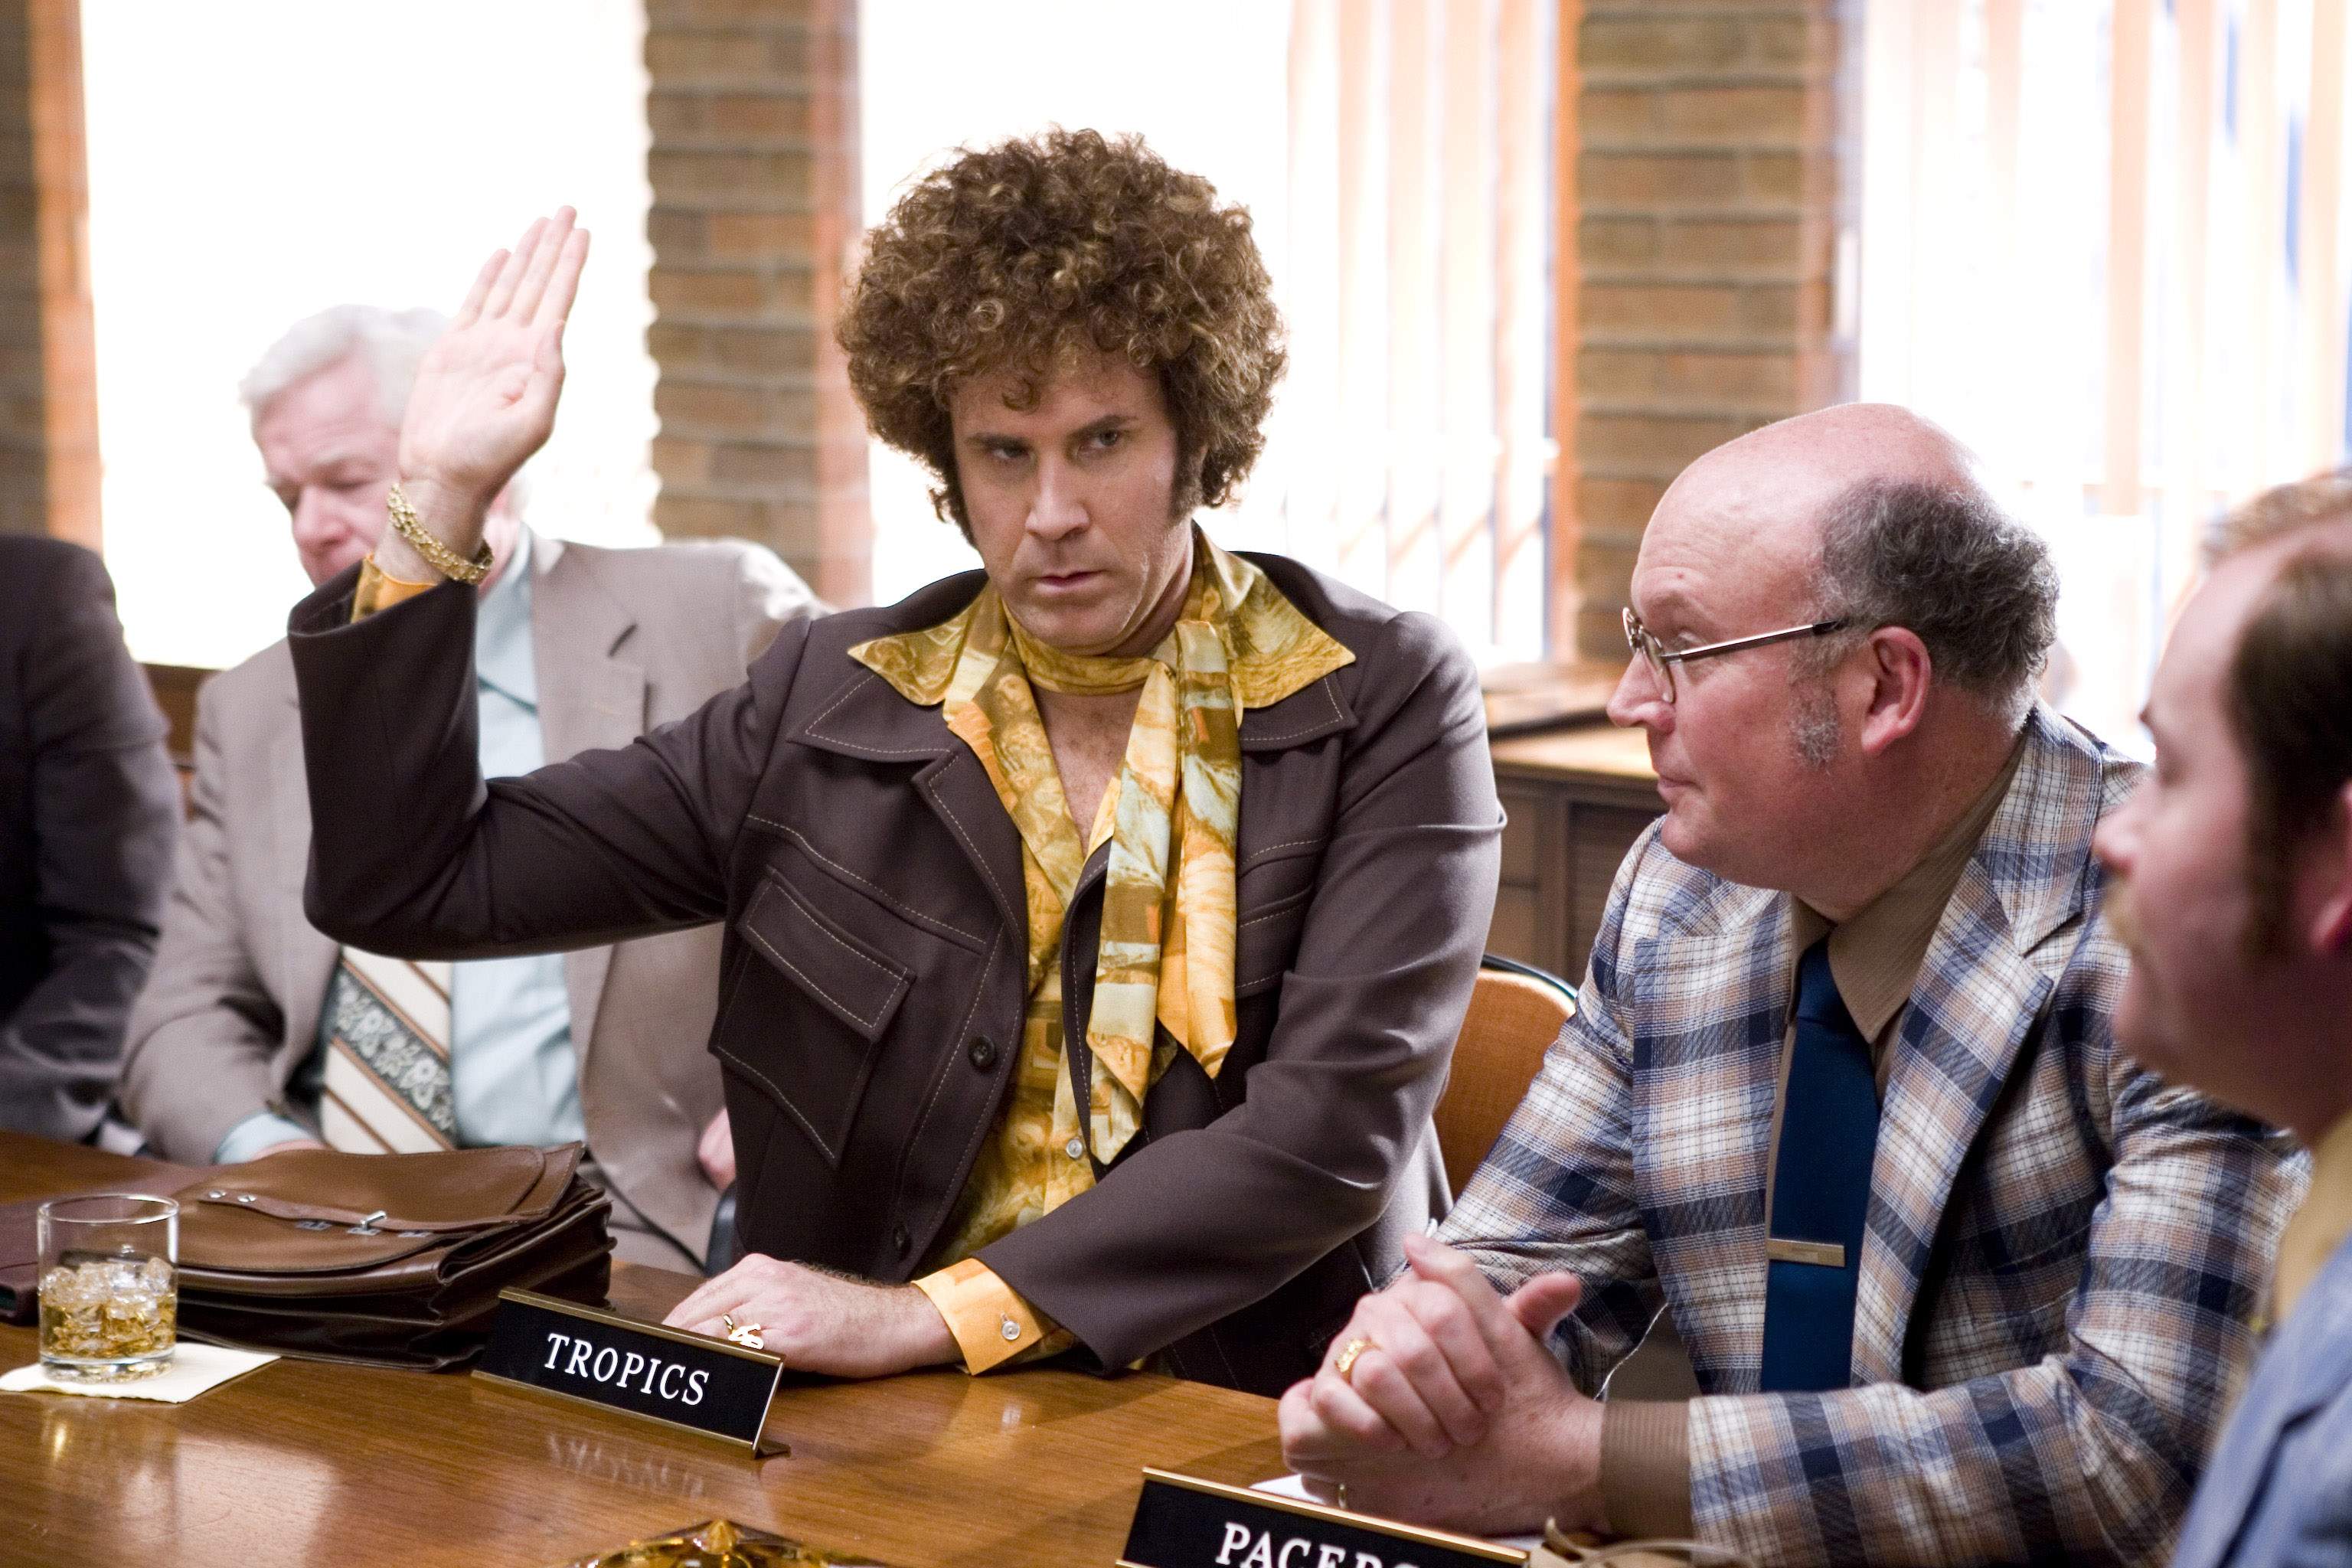 Will Ferrell (center) stars as Jackie Moon, owner of the Flint Tropics, in New Line Cinema's upcoming comedy, SEMI-PRO. Photo Credit: Frank Masi.